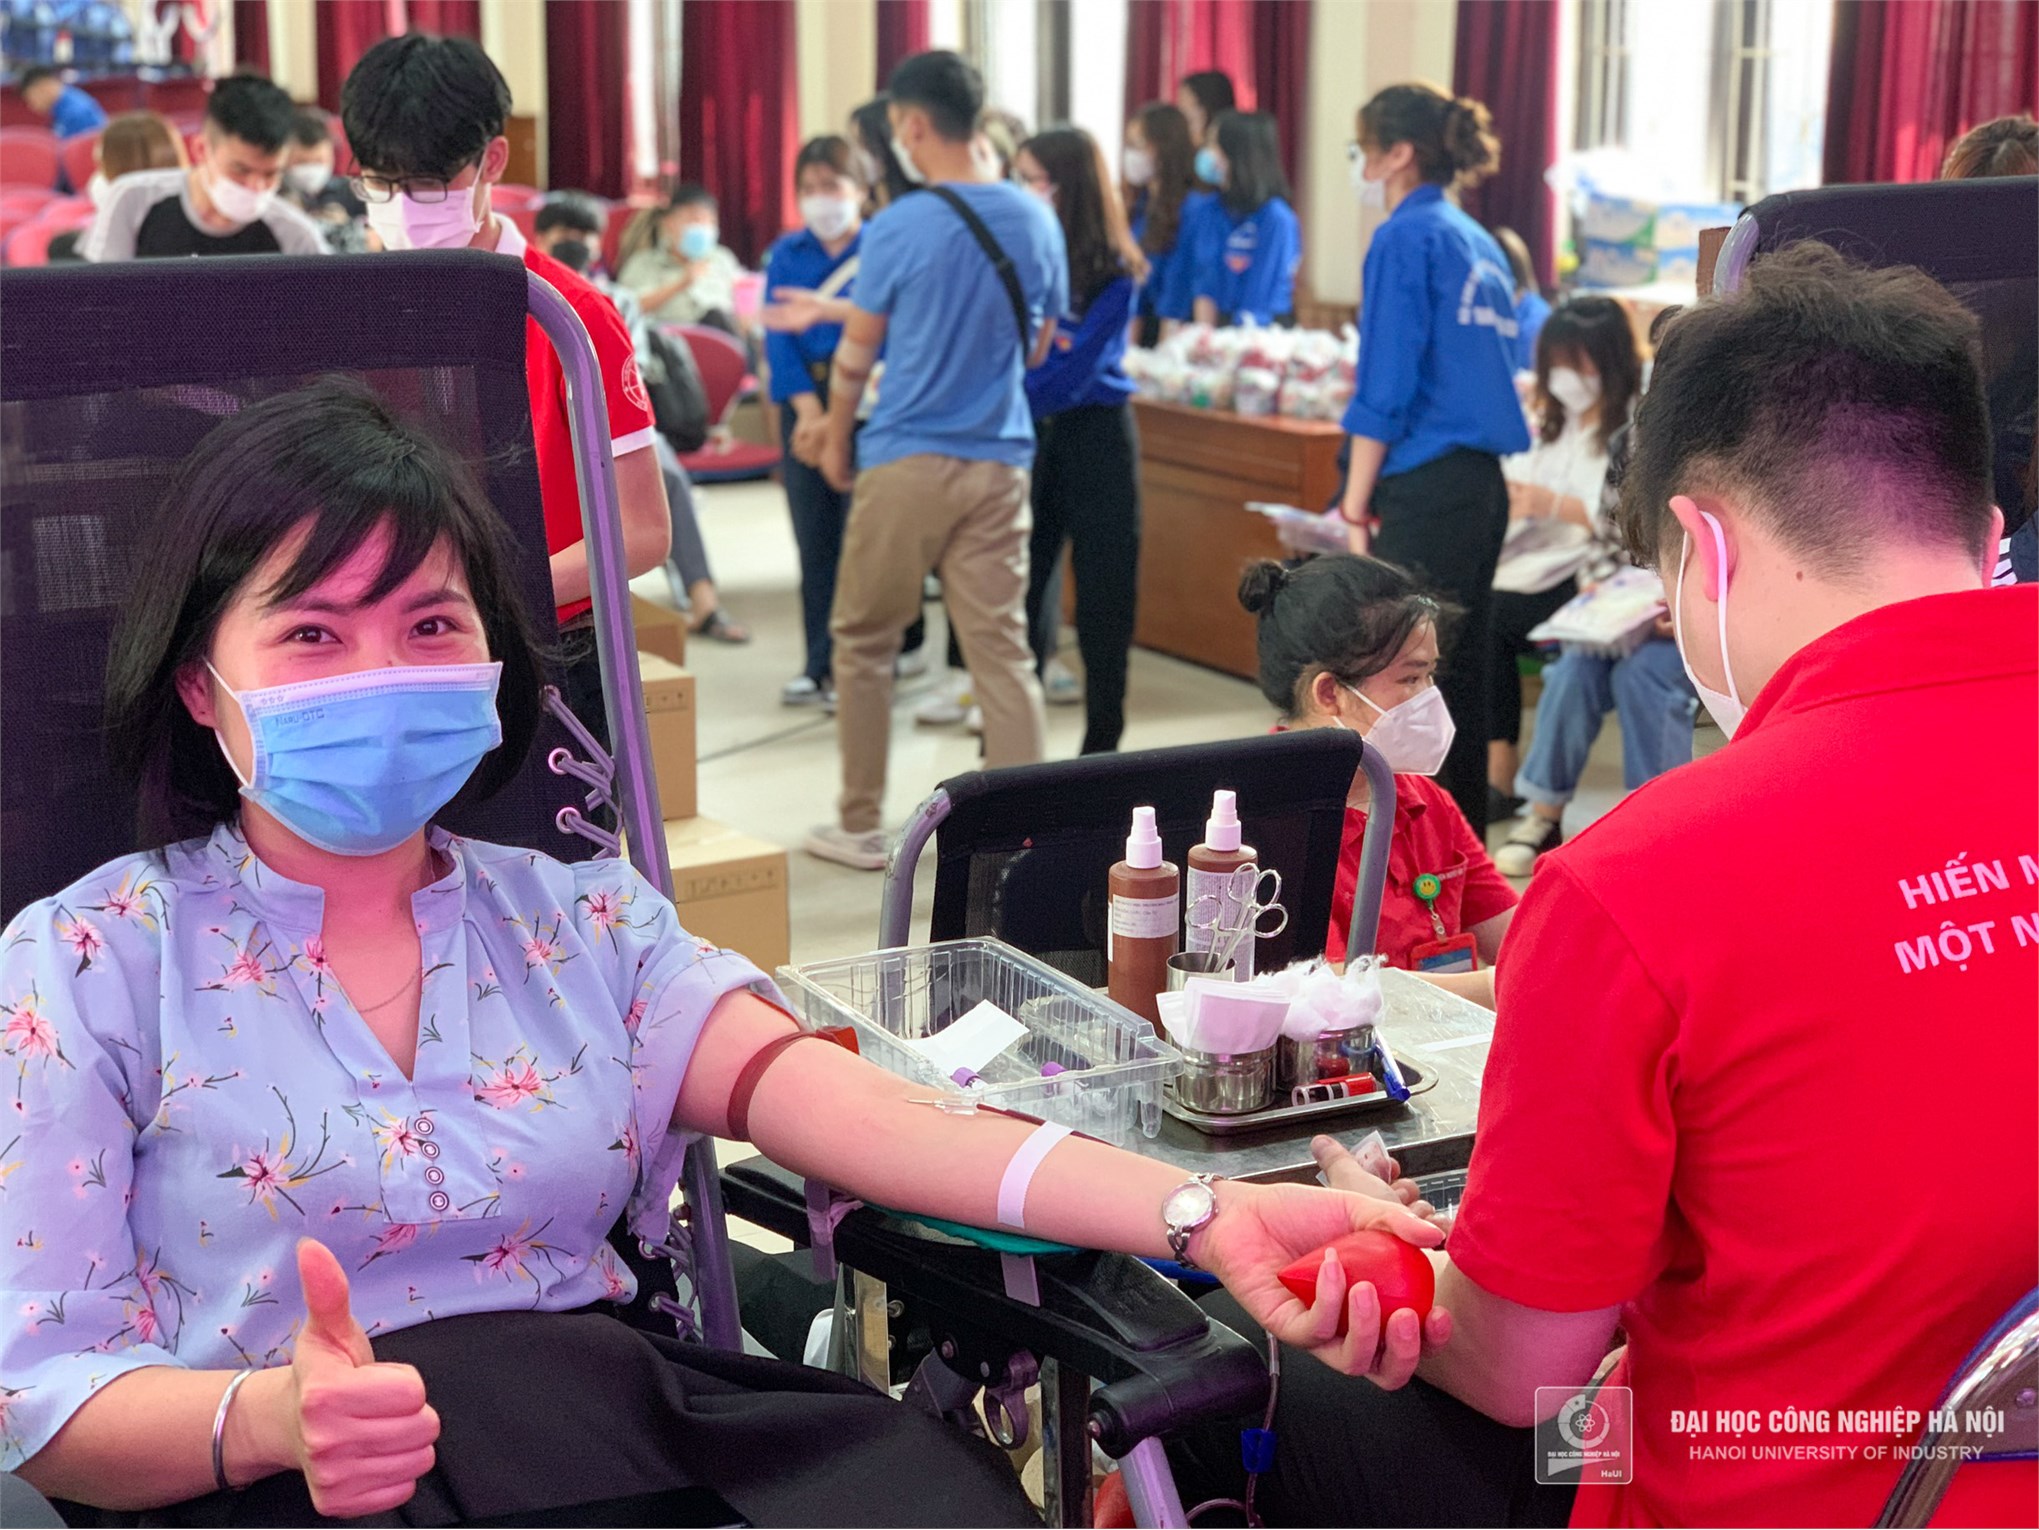 Blood Donor Day: “Rainbow of Compassion”